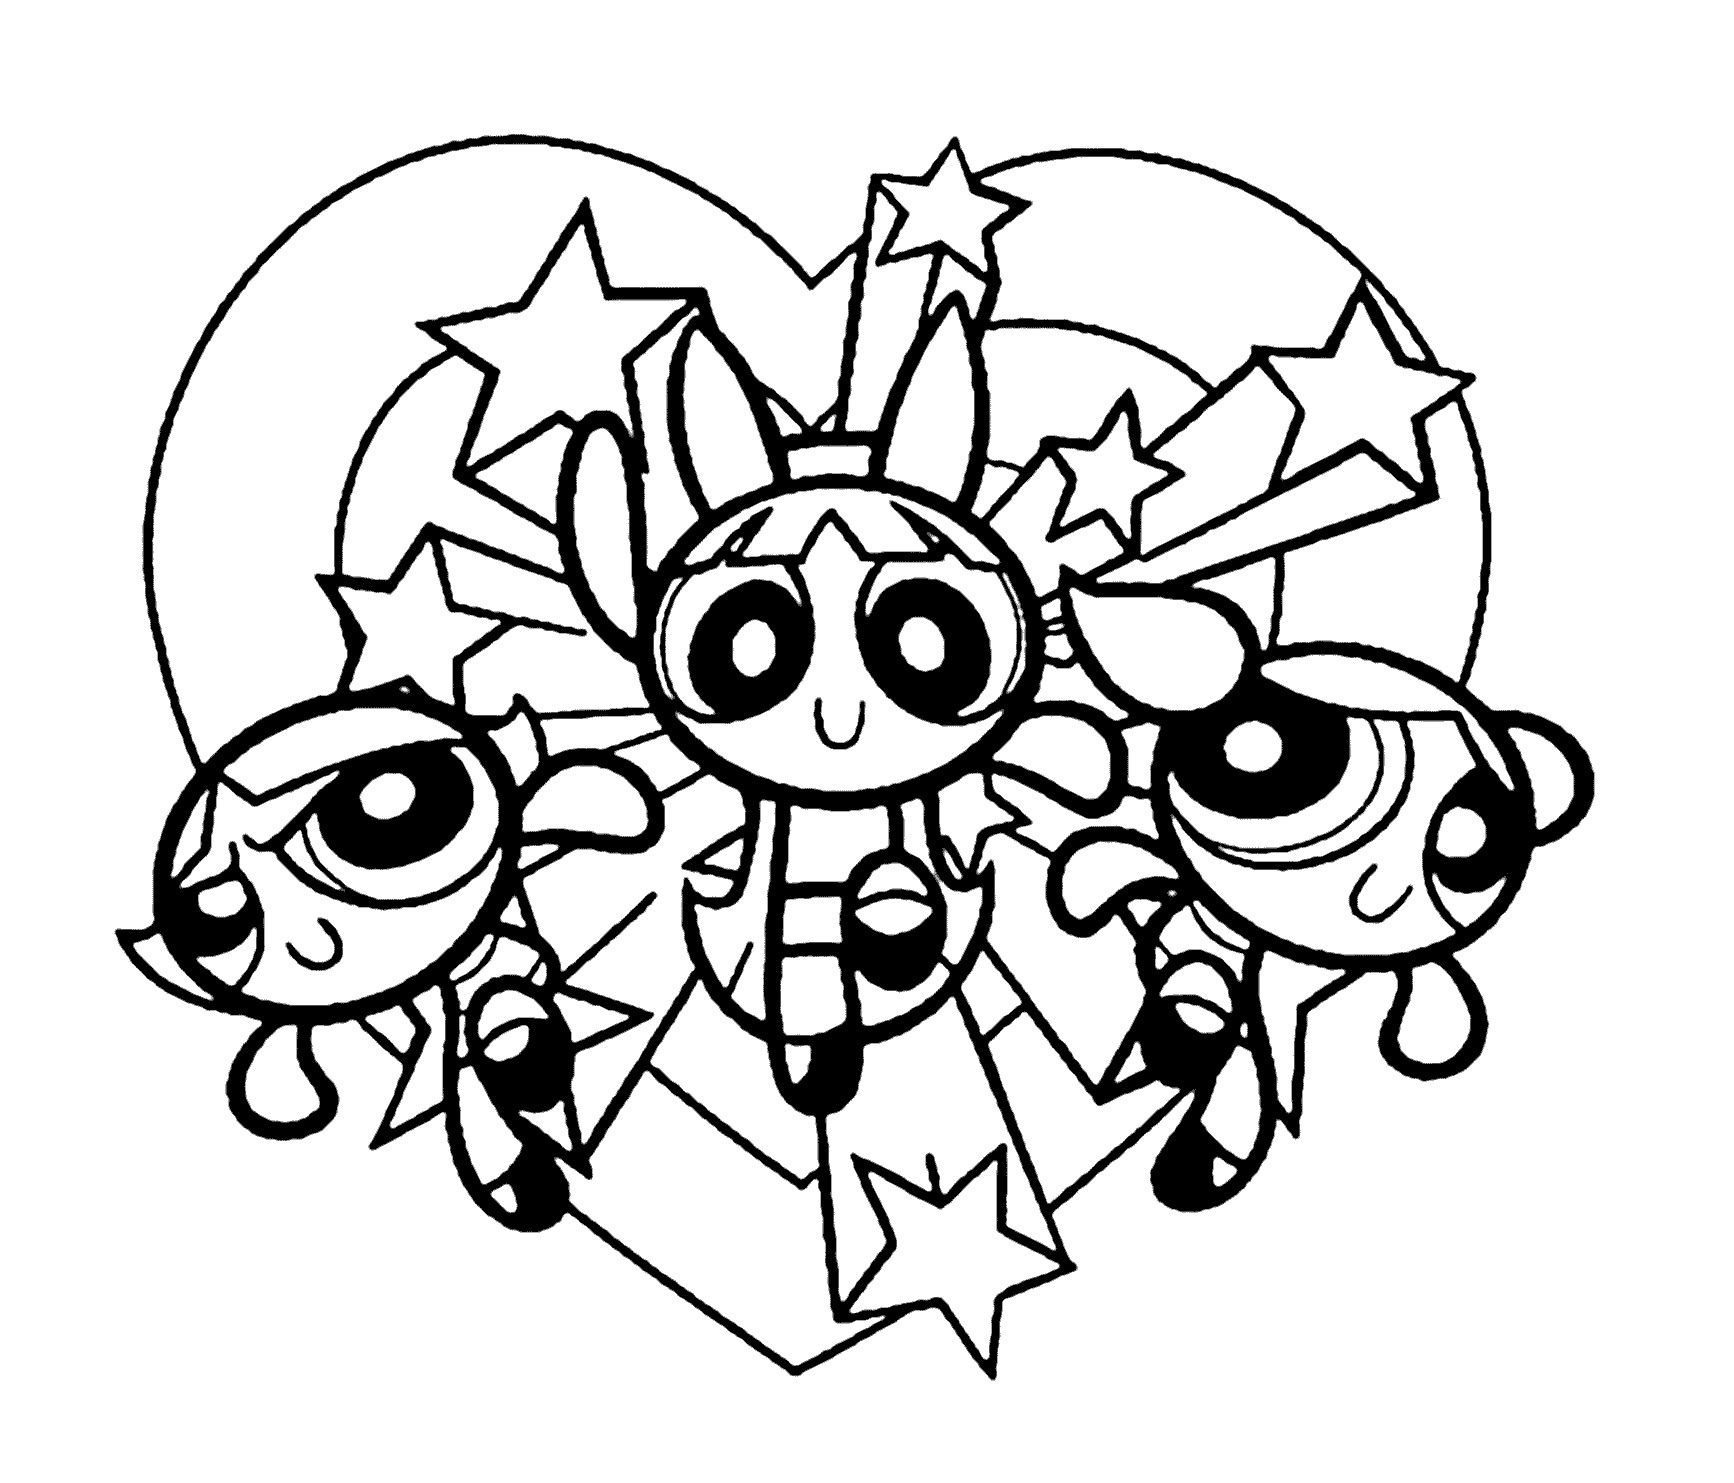 Coloring Pages Powerpuff Girls
 Coloring Pages For Girls 9 10